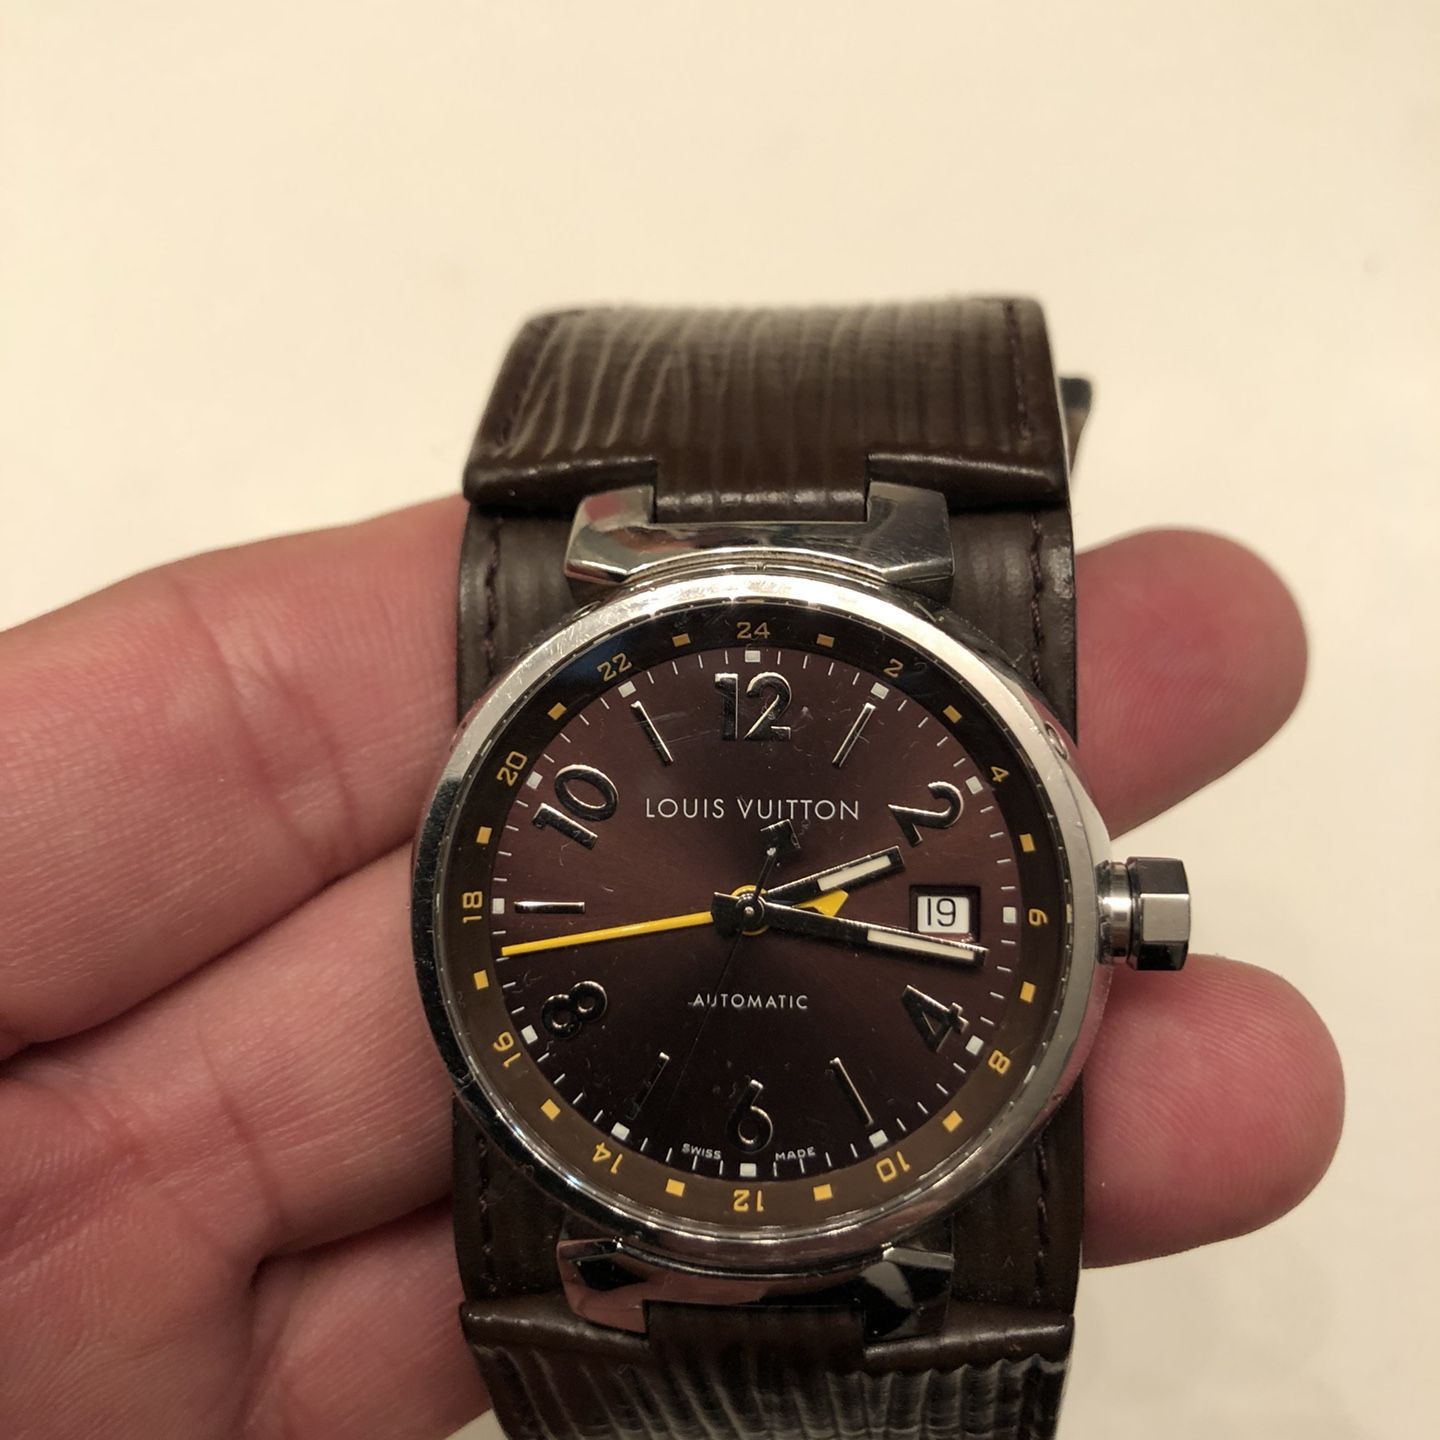 LOUIS VUITTON Tambour Chronograph LV277 Watch for Sale in San Francisco, CA  - OfferUp